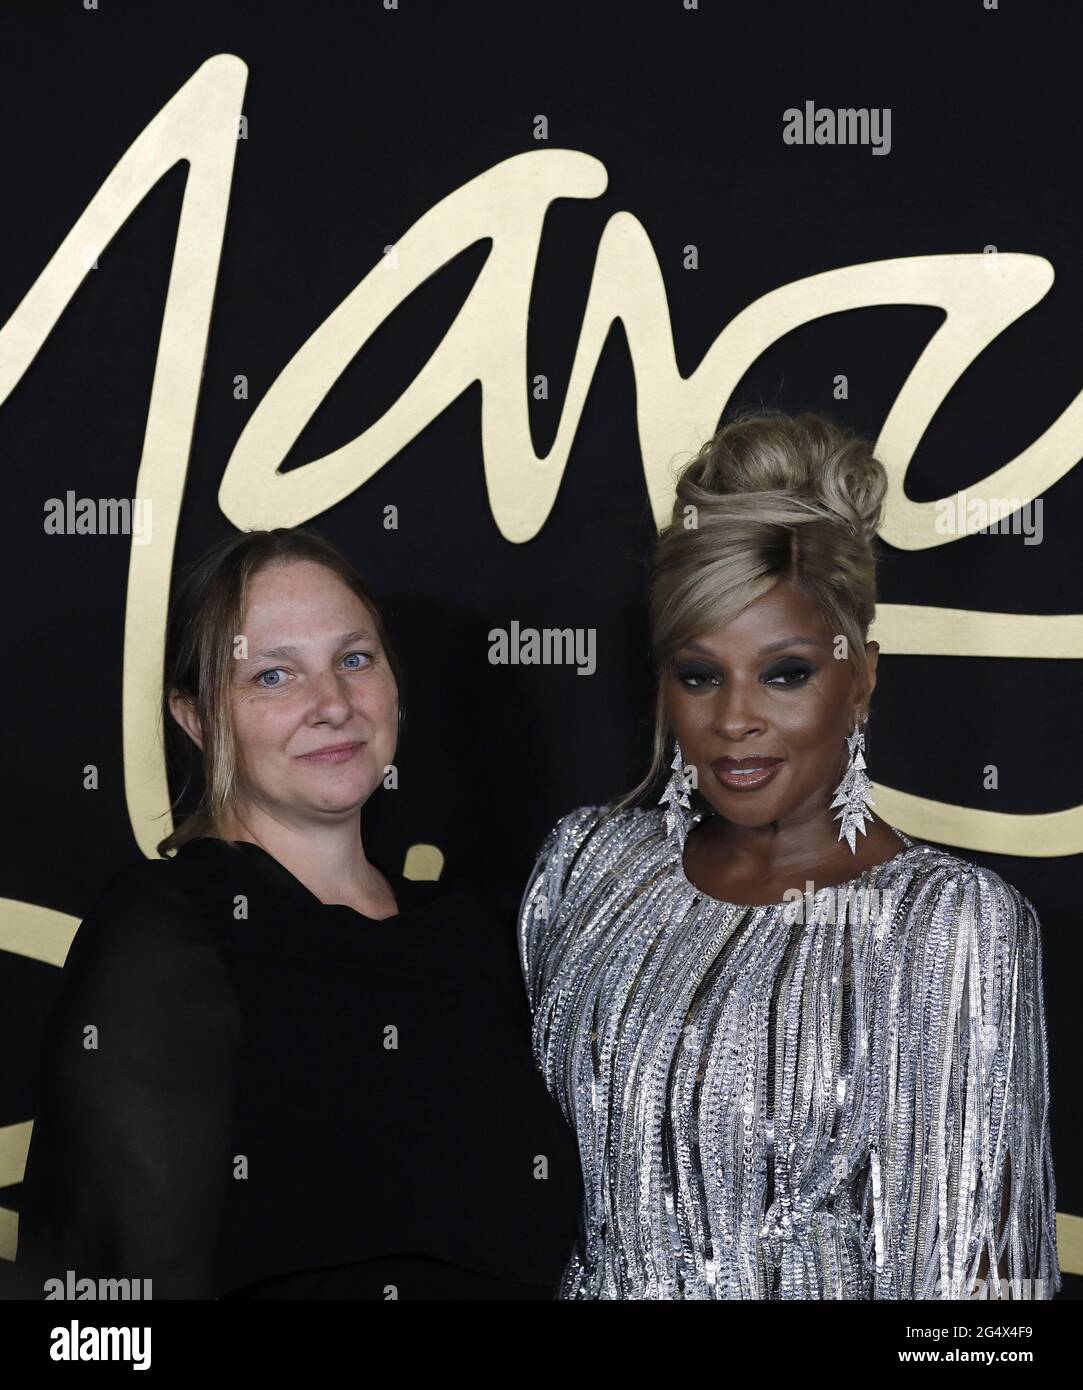 New York, United States. 23rd June, 2021. Mary J. Blige, American singer,  songwriter and actress (R) arrives with film director Vanessa Roth arrive  on the red carpet for the premiere of the